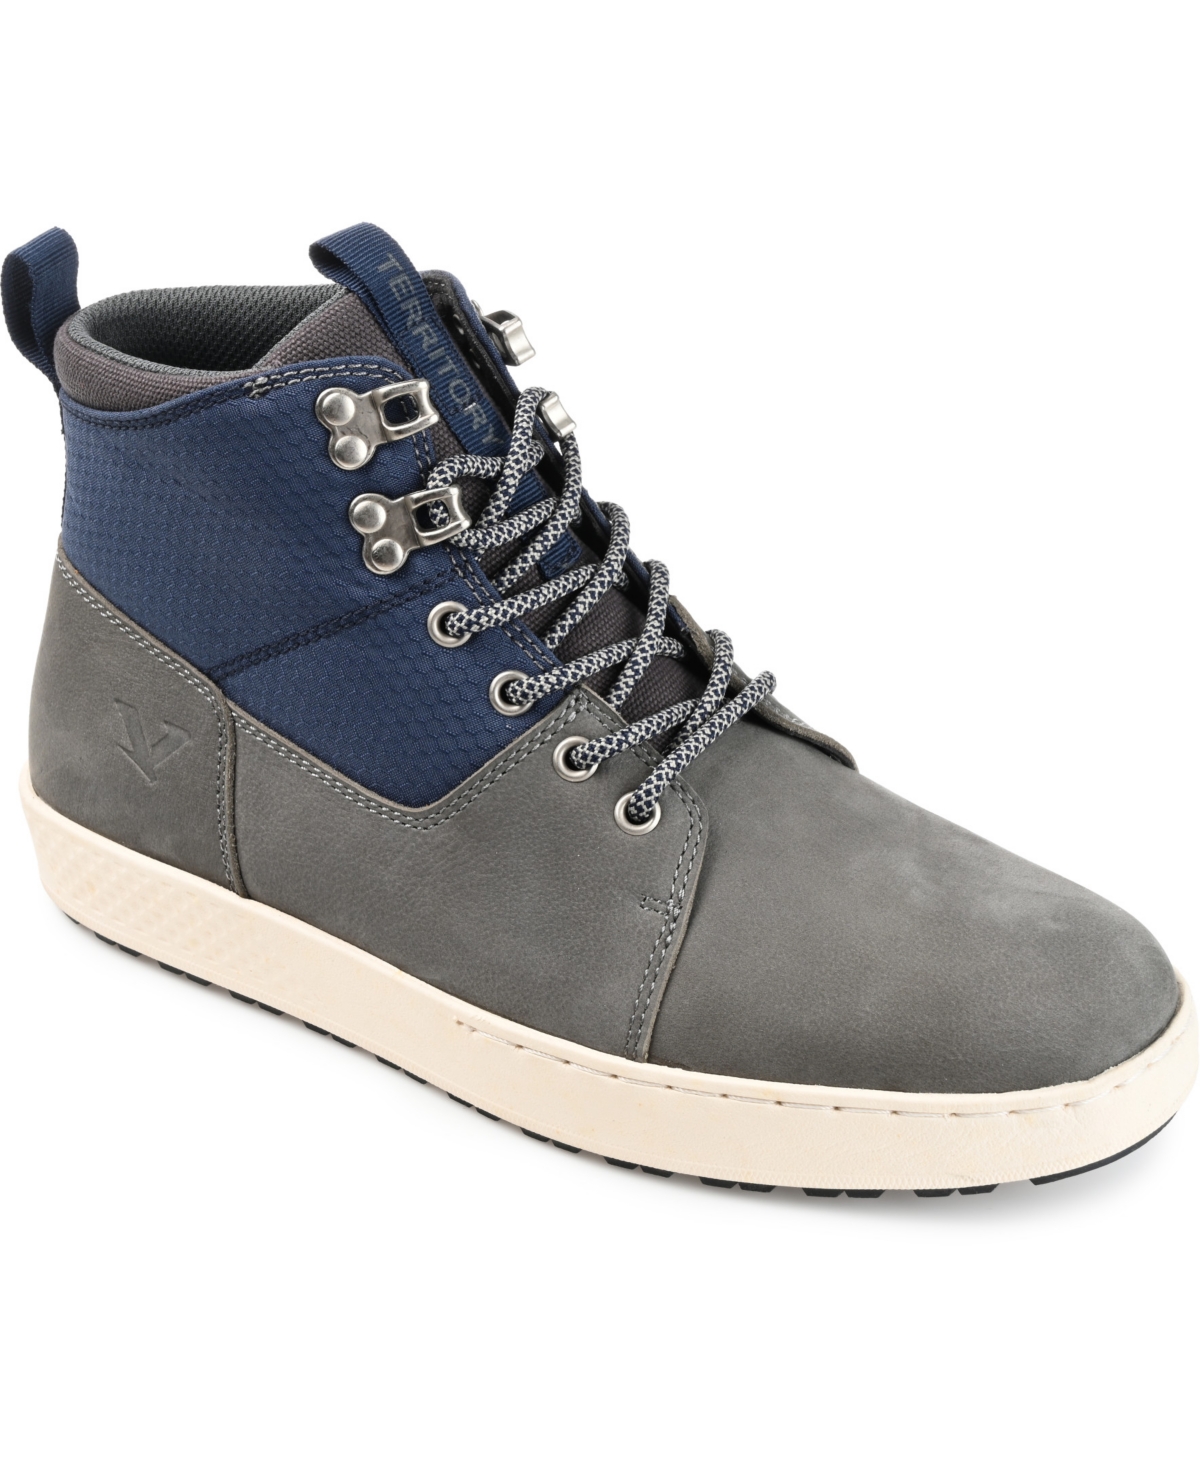 TERRITORY MEN'S WASATCH OVERLAND BOOTS MEN'S SHOES